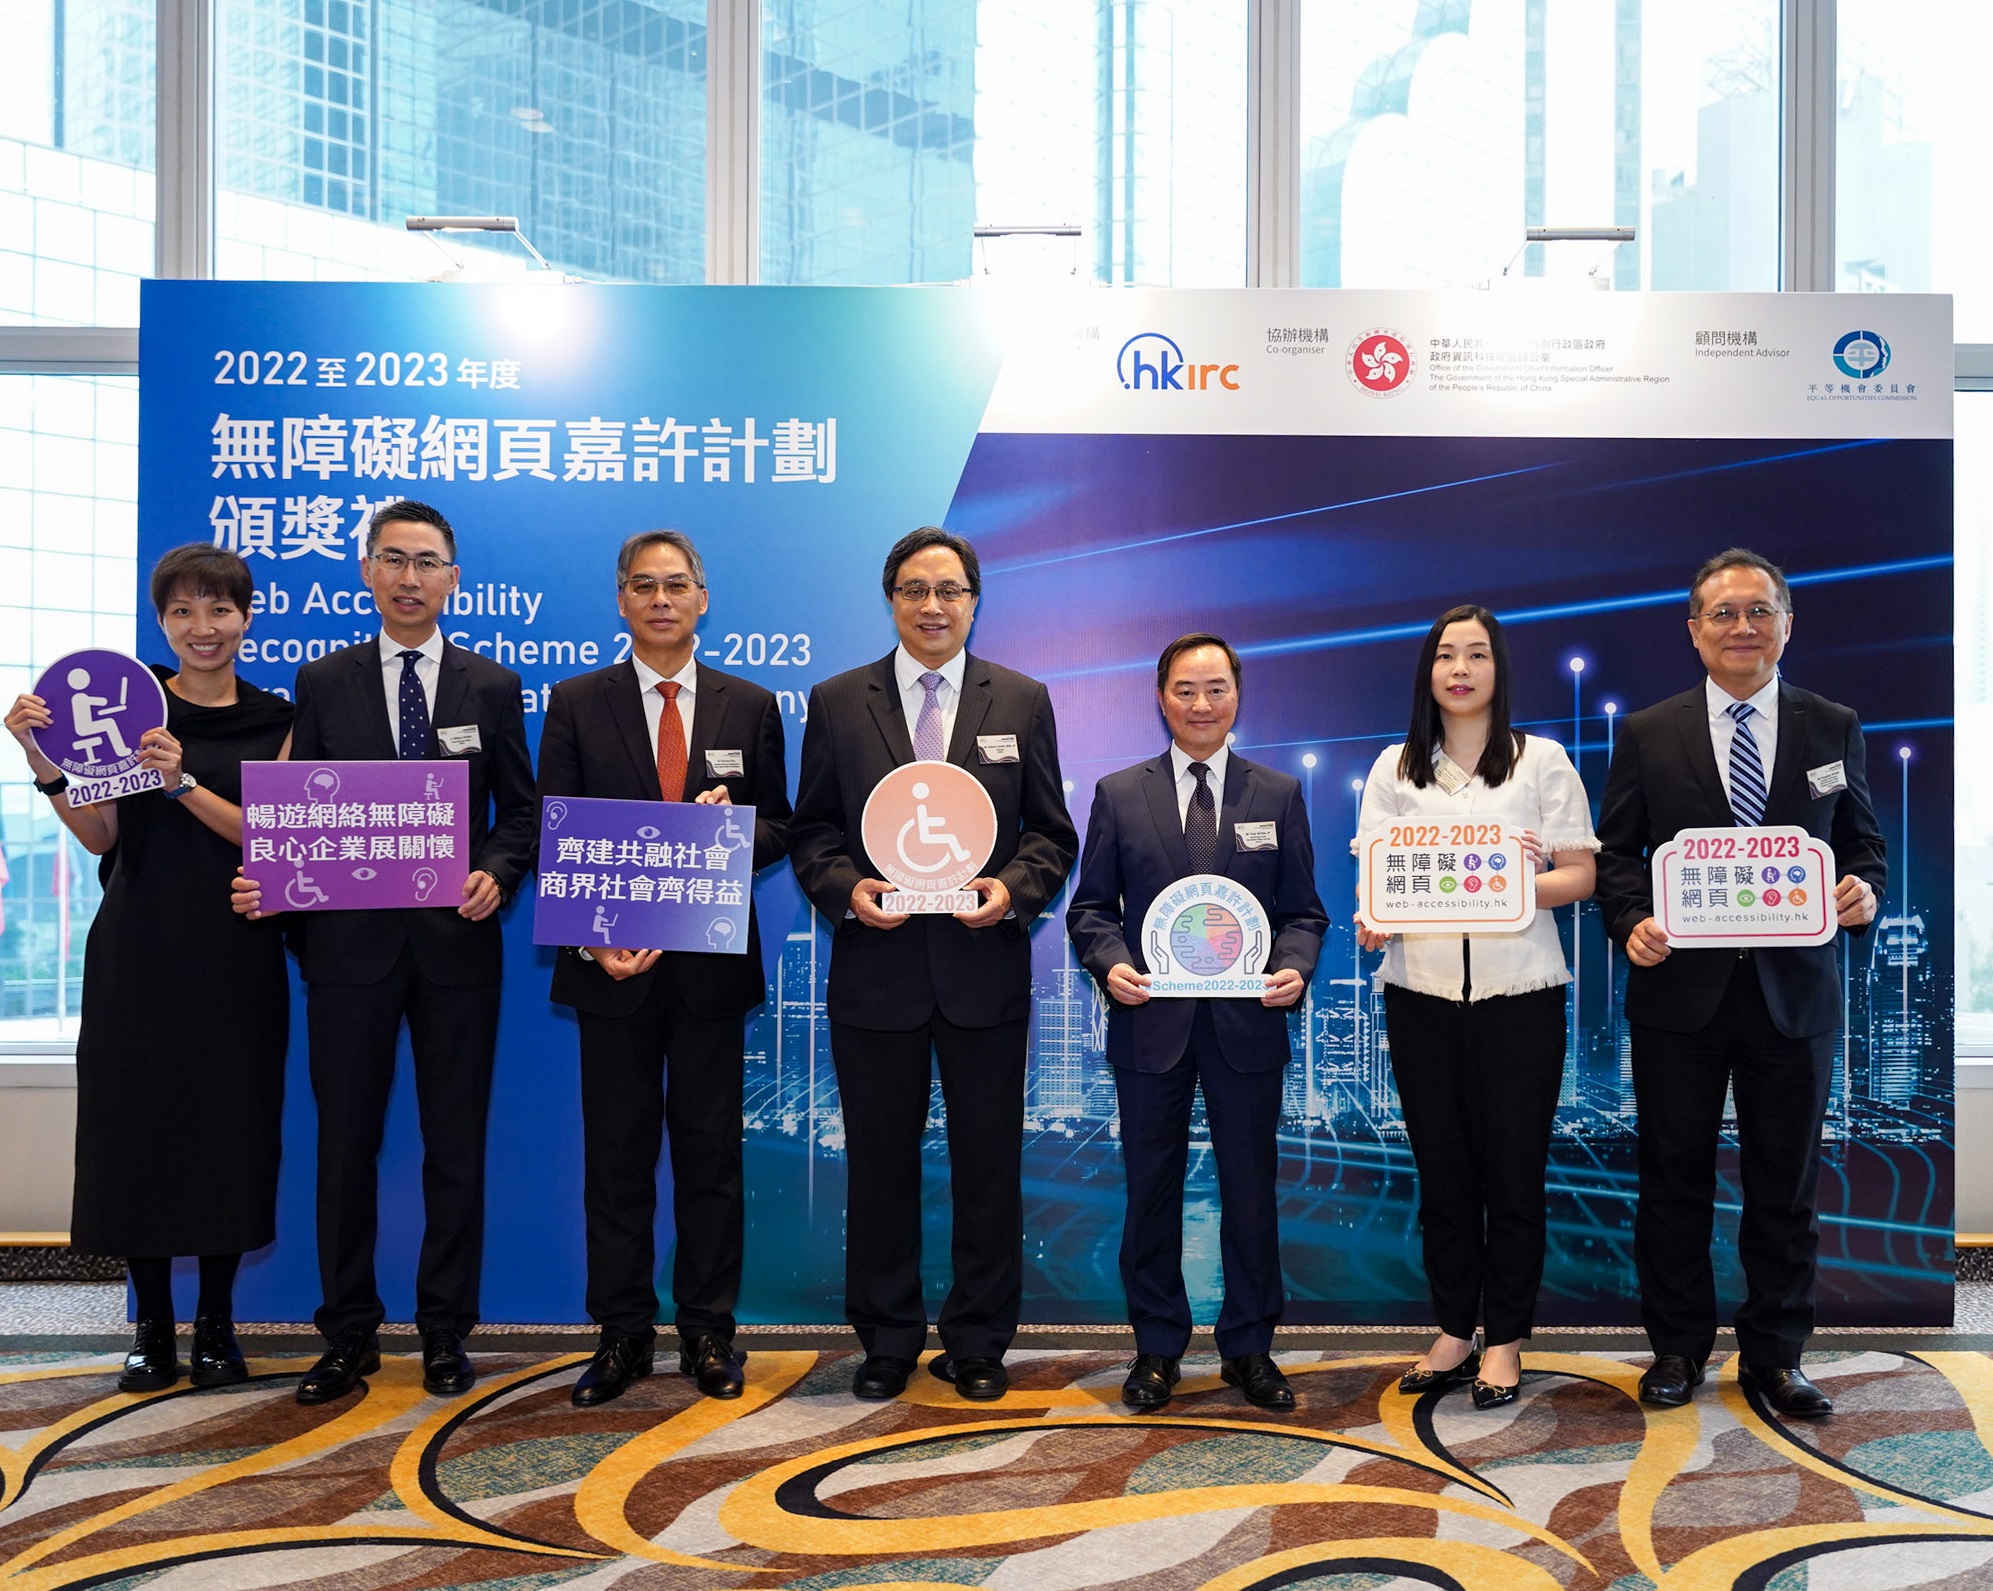 Web Accessibility Recognition Scheme 2022-23 concludes successfully  